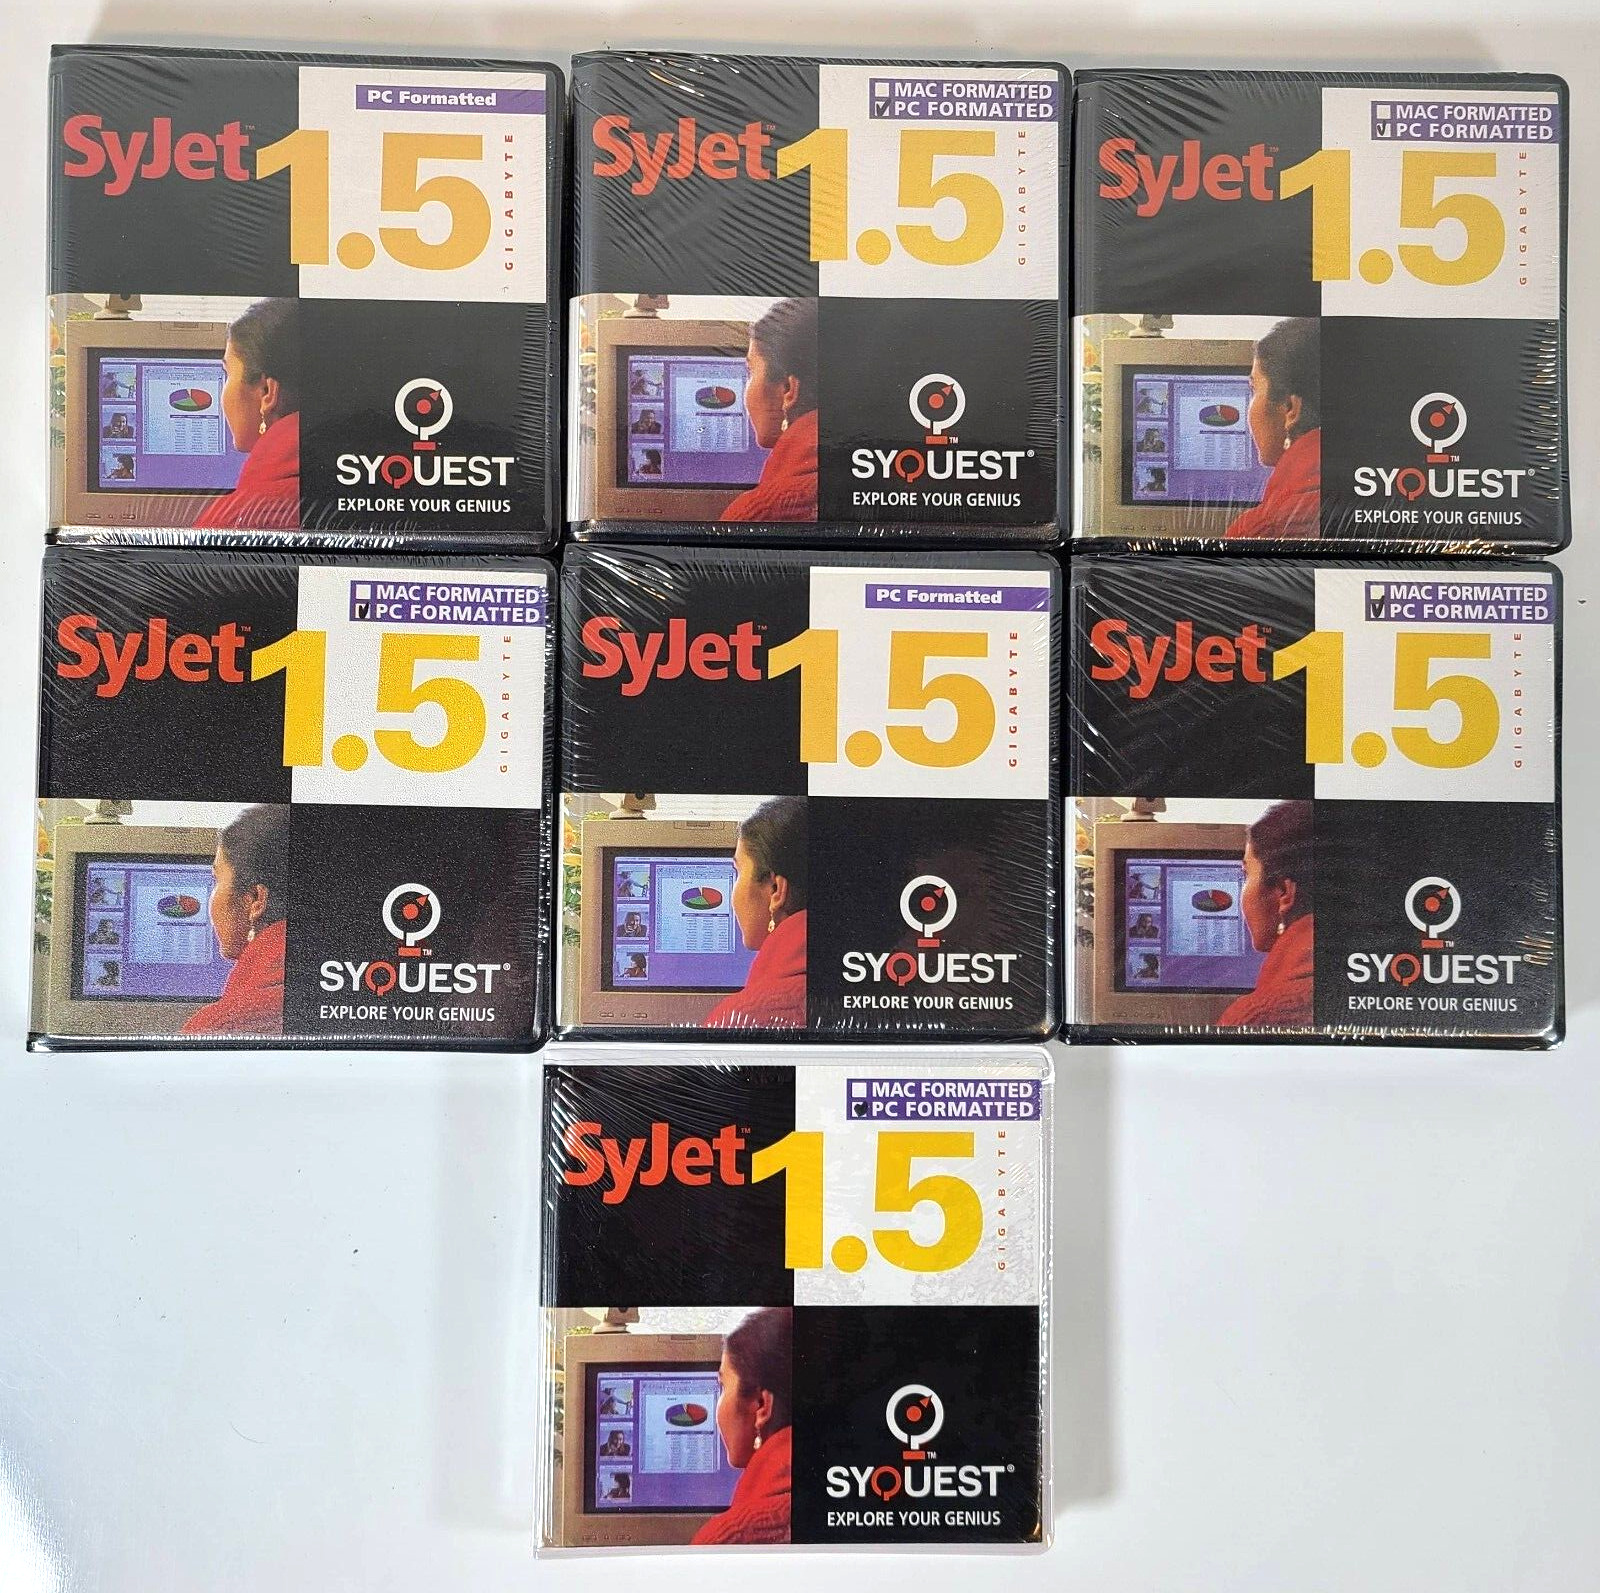 SyQuest Syjet 1.5GB Media Storage - PC Formatted Discs Vintage Computer-Lot of 7